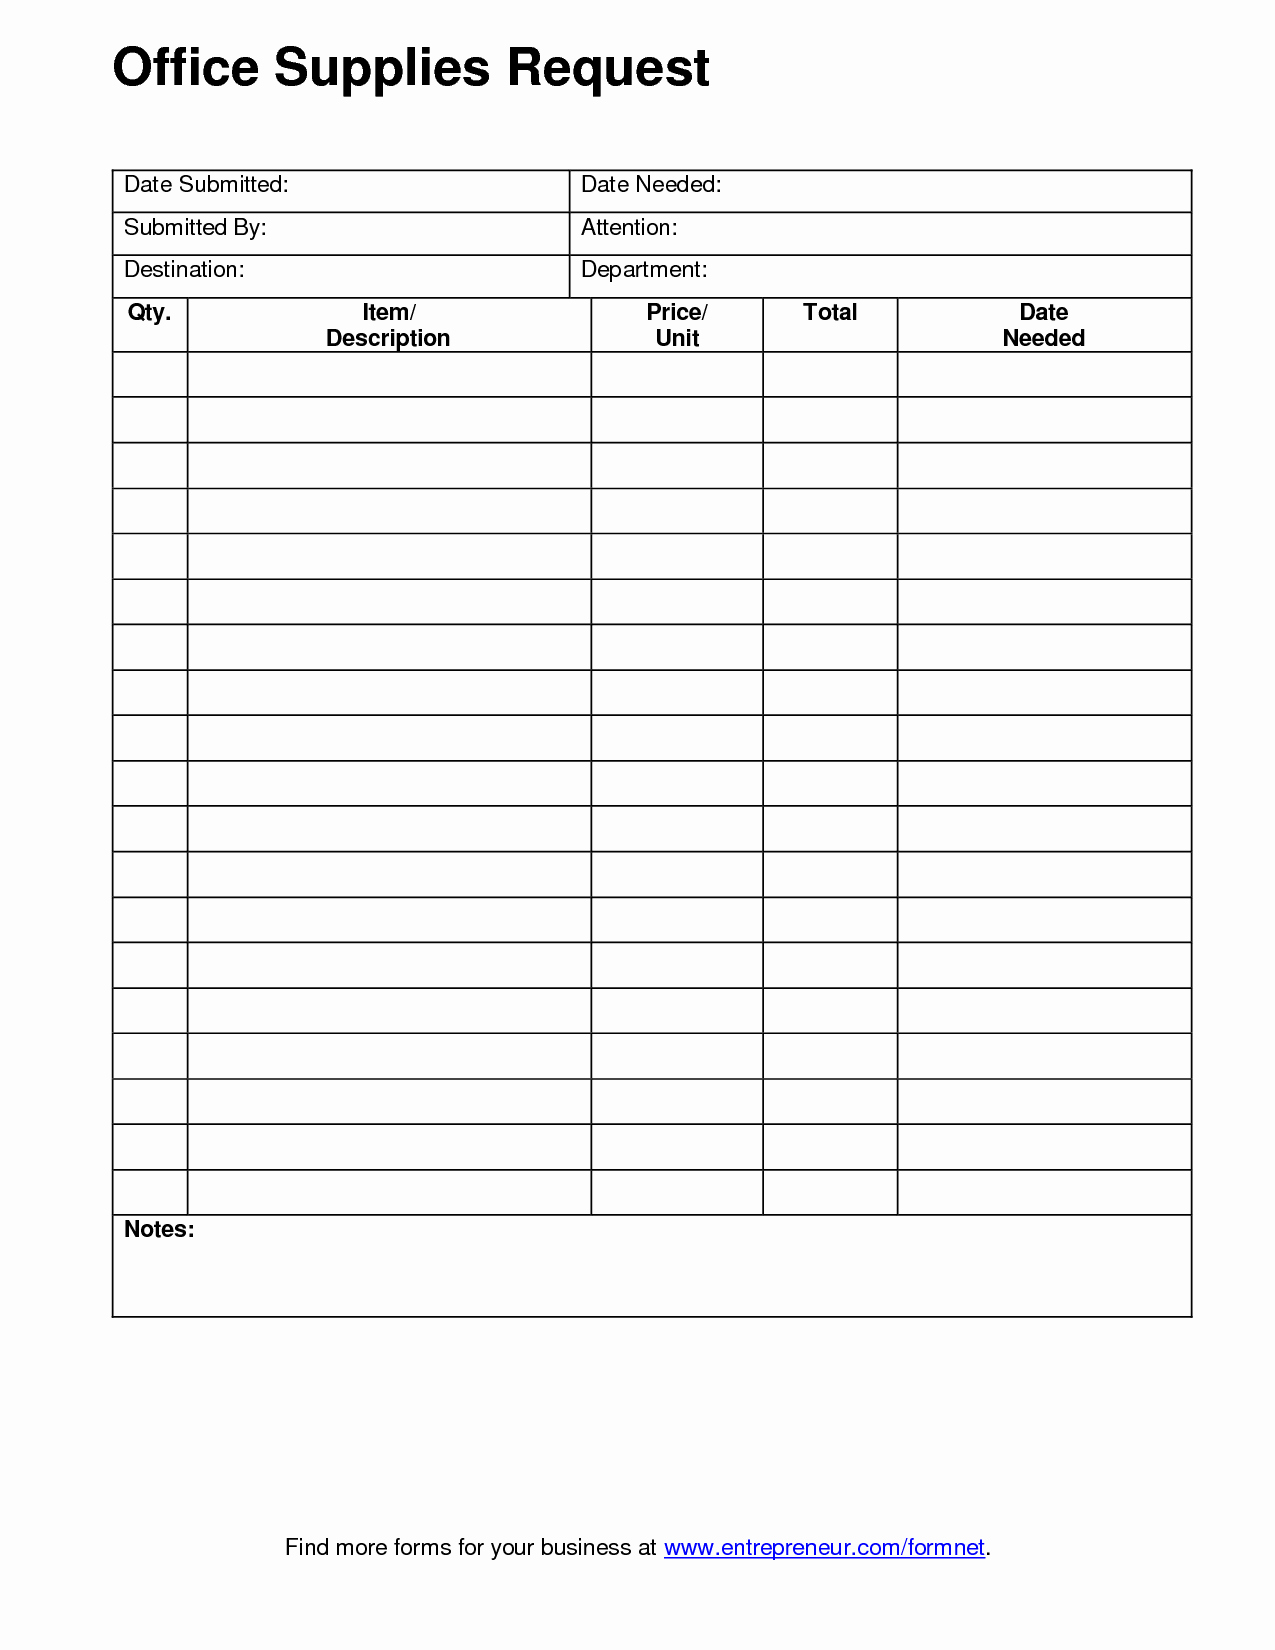 Office Supplies Request form Beautiful Medical Supply Inventory Spreadsheet